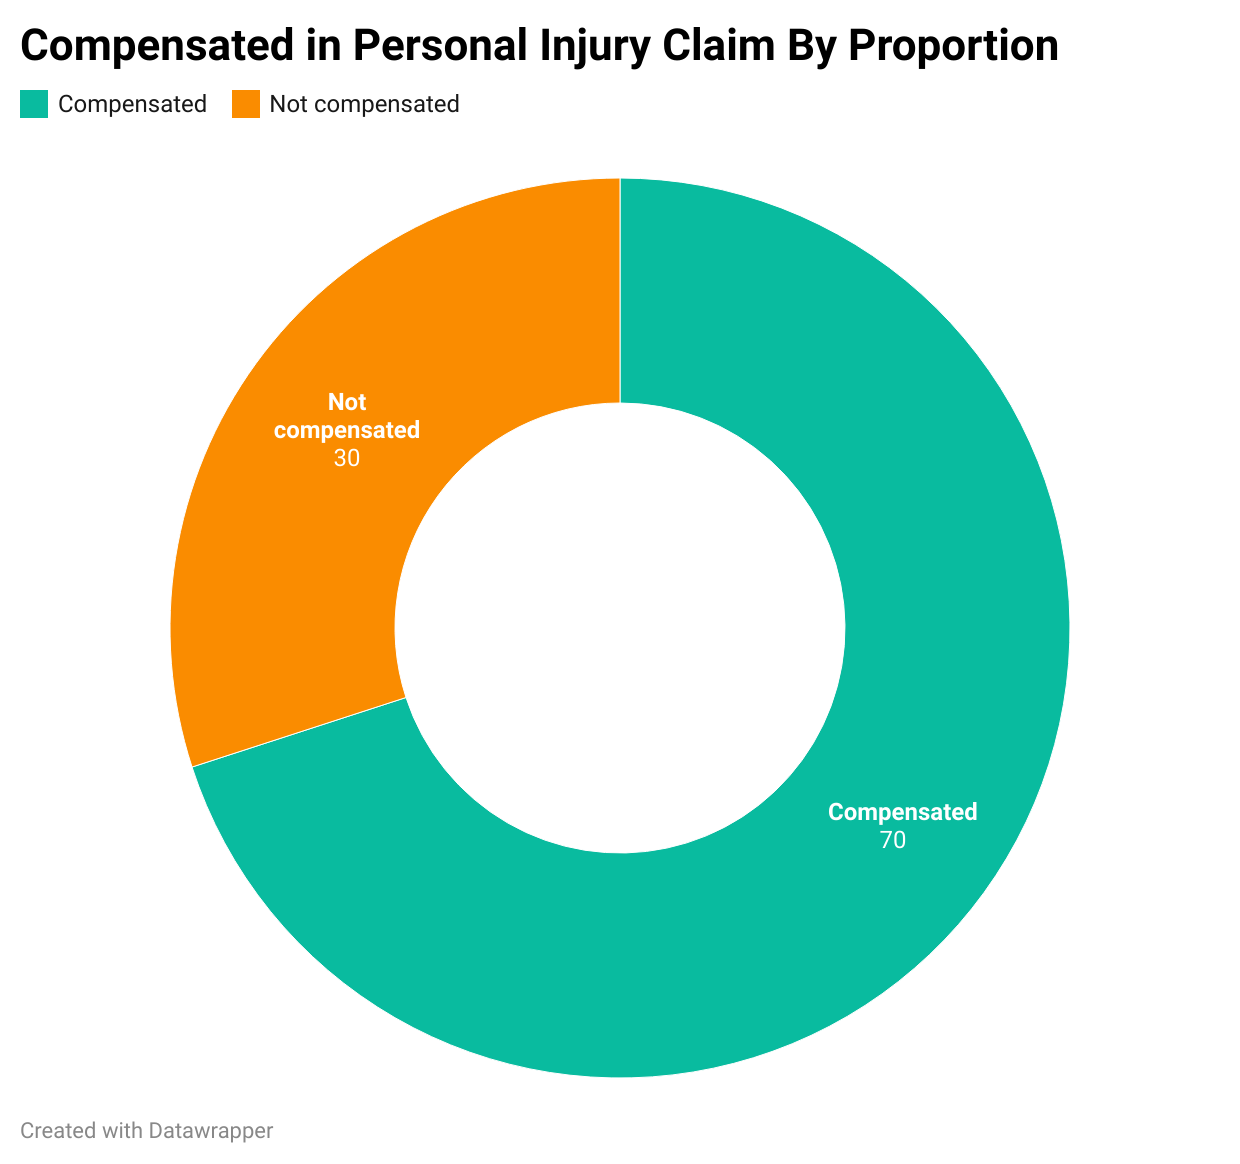 Compensated in Personal Injury Claim by Proportion